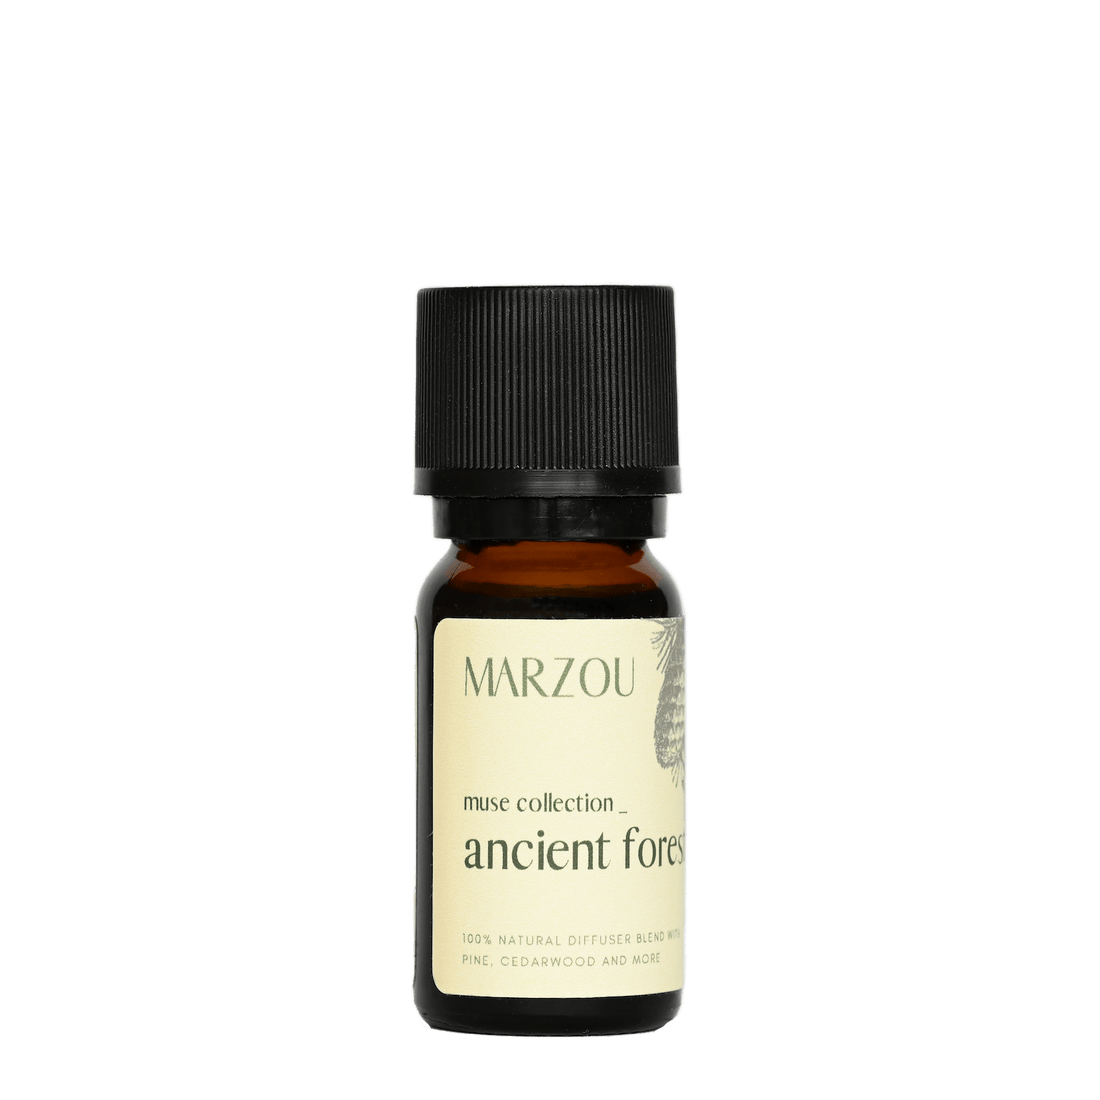 ancient forest diffuser blend of marzou muse collection grounding and calming scent